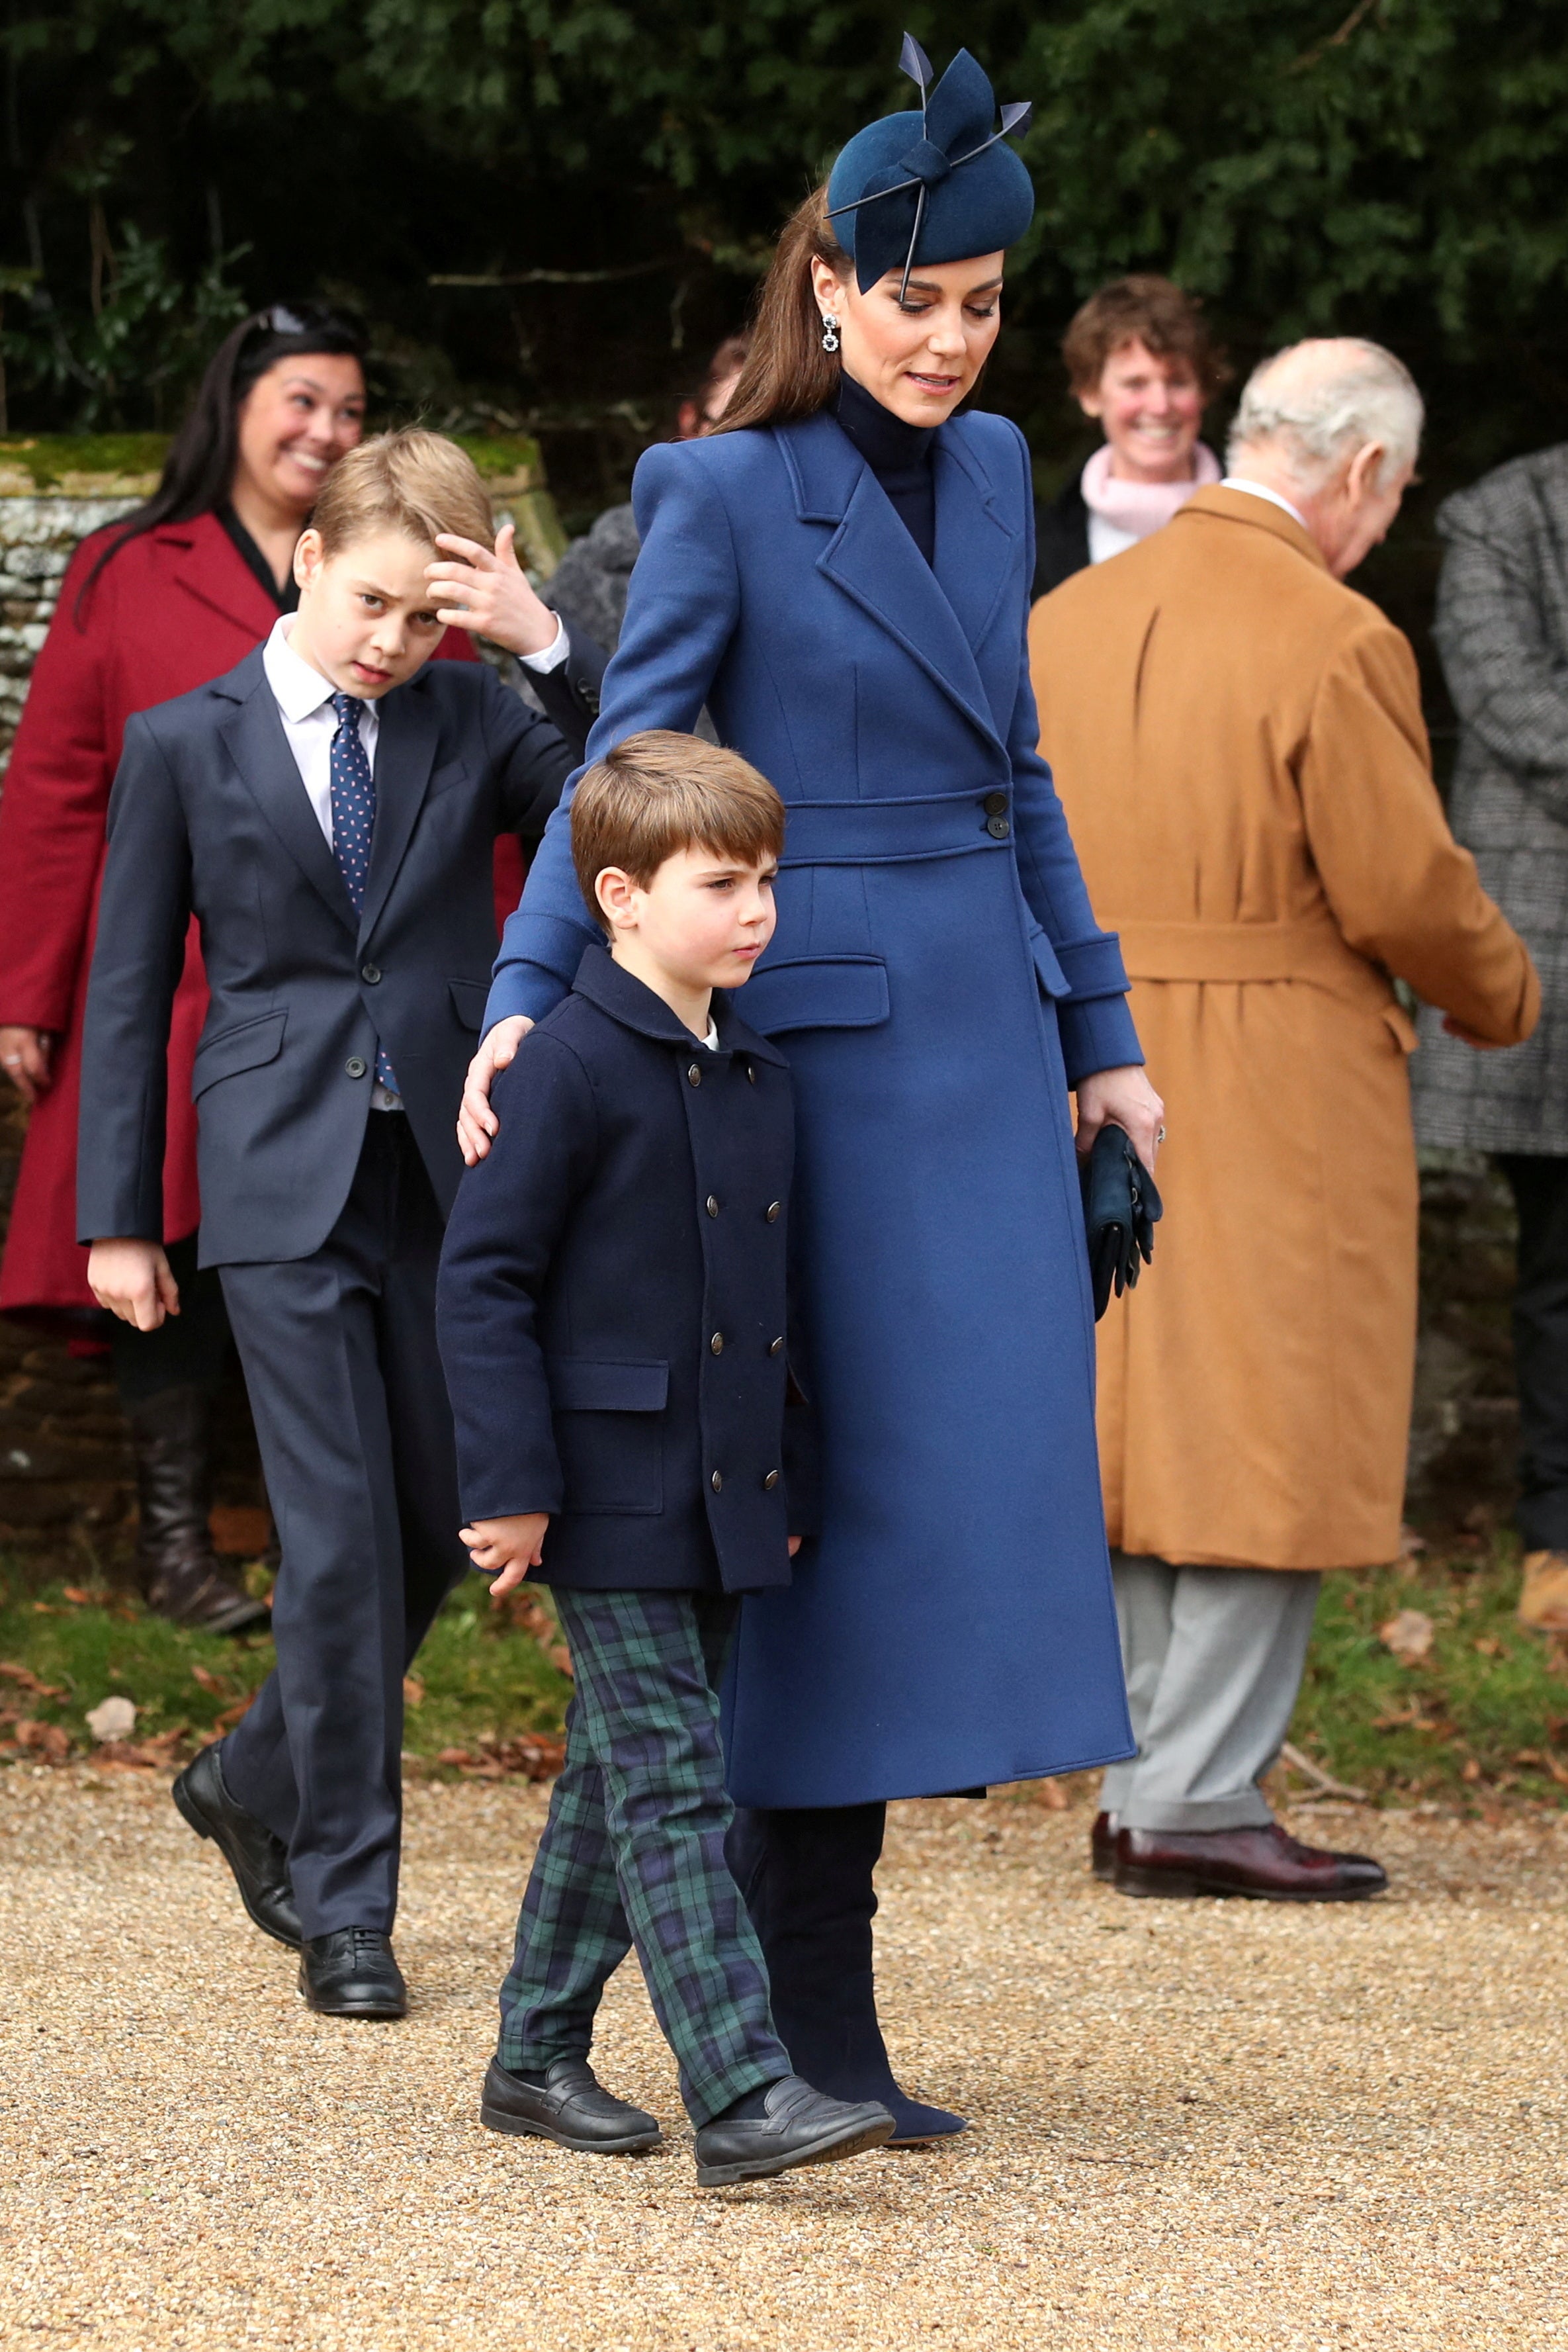 Kate and Louis were last reliably photographed together in December